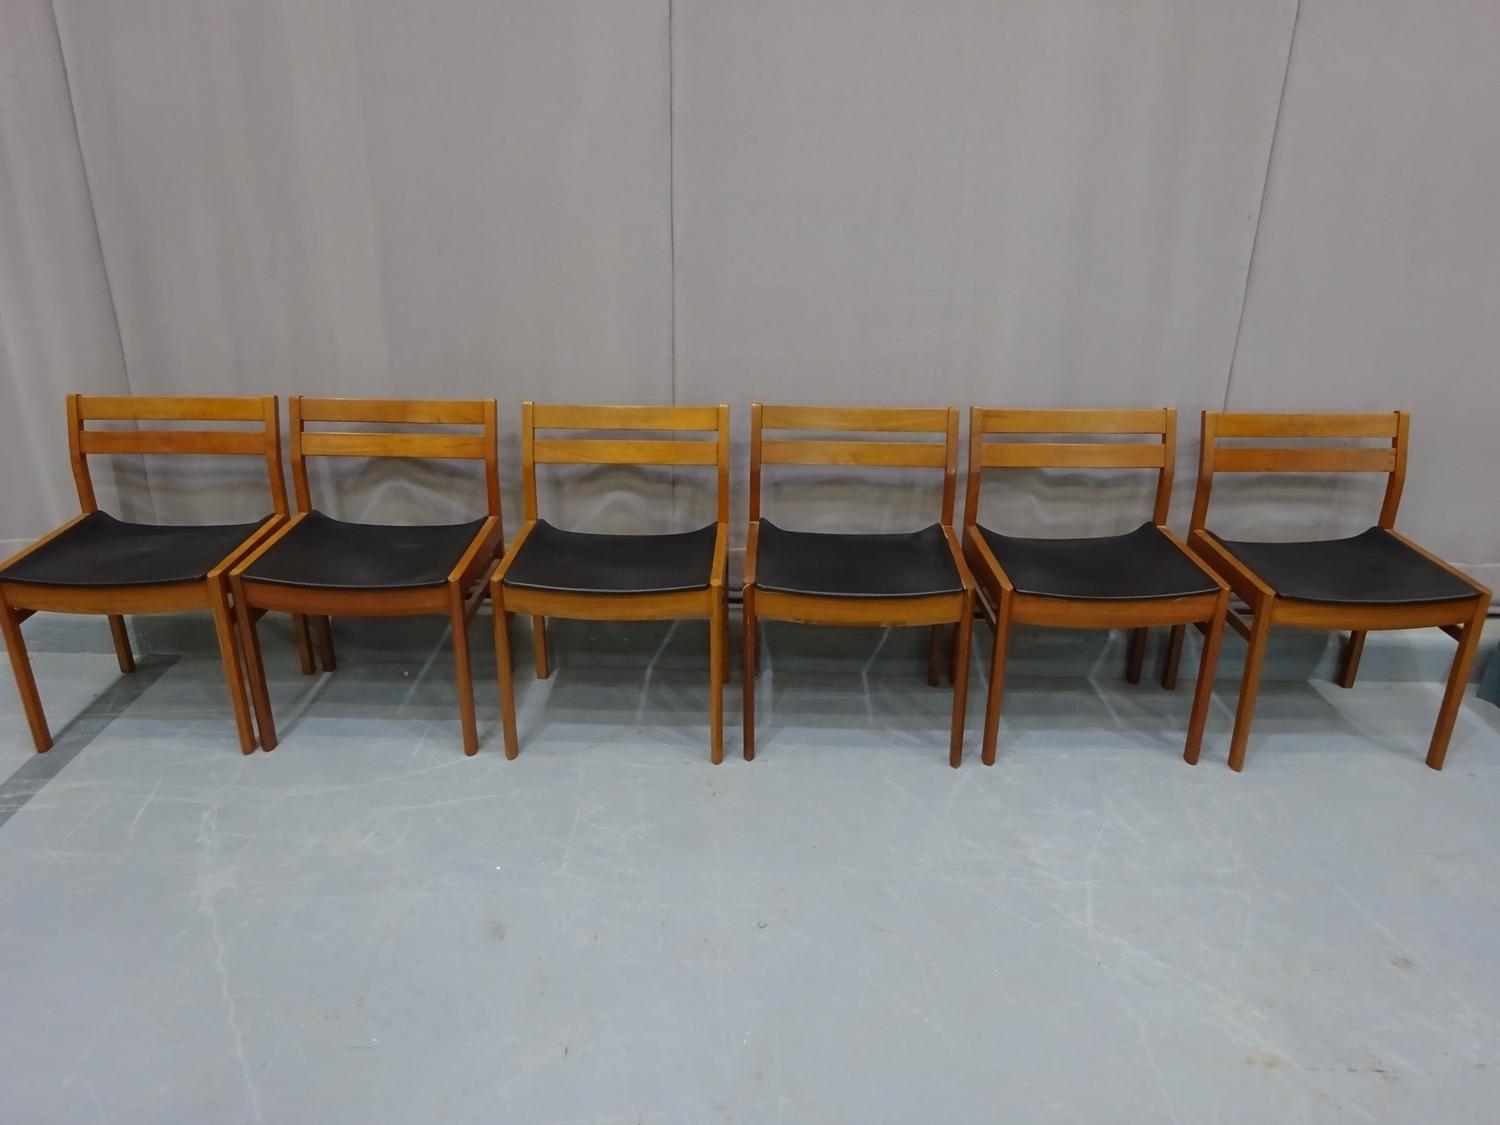 6 x Danish style teak & black dining chairs with ladder back. - Image 2 of 4